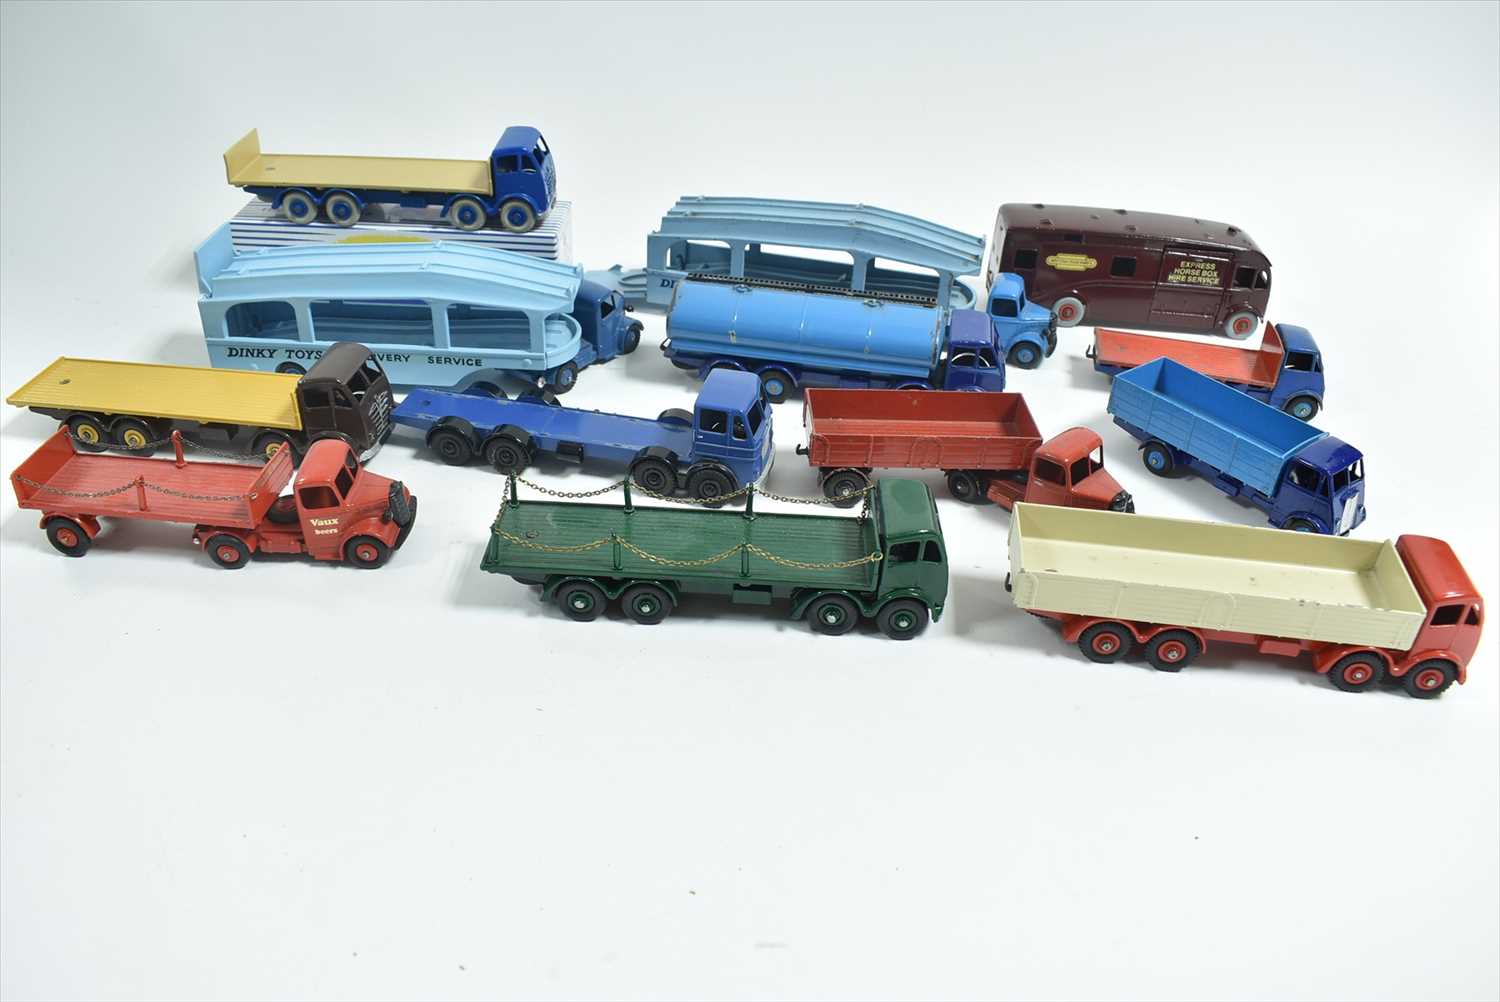 Lot 184 - Dinky wagons